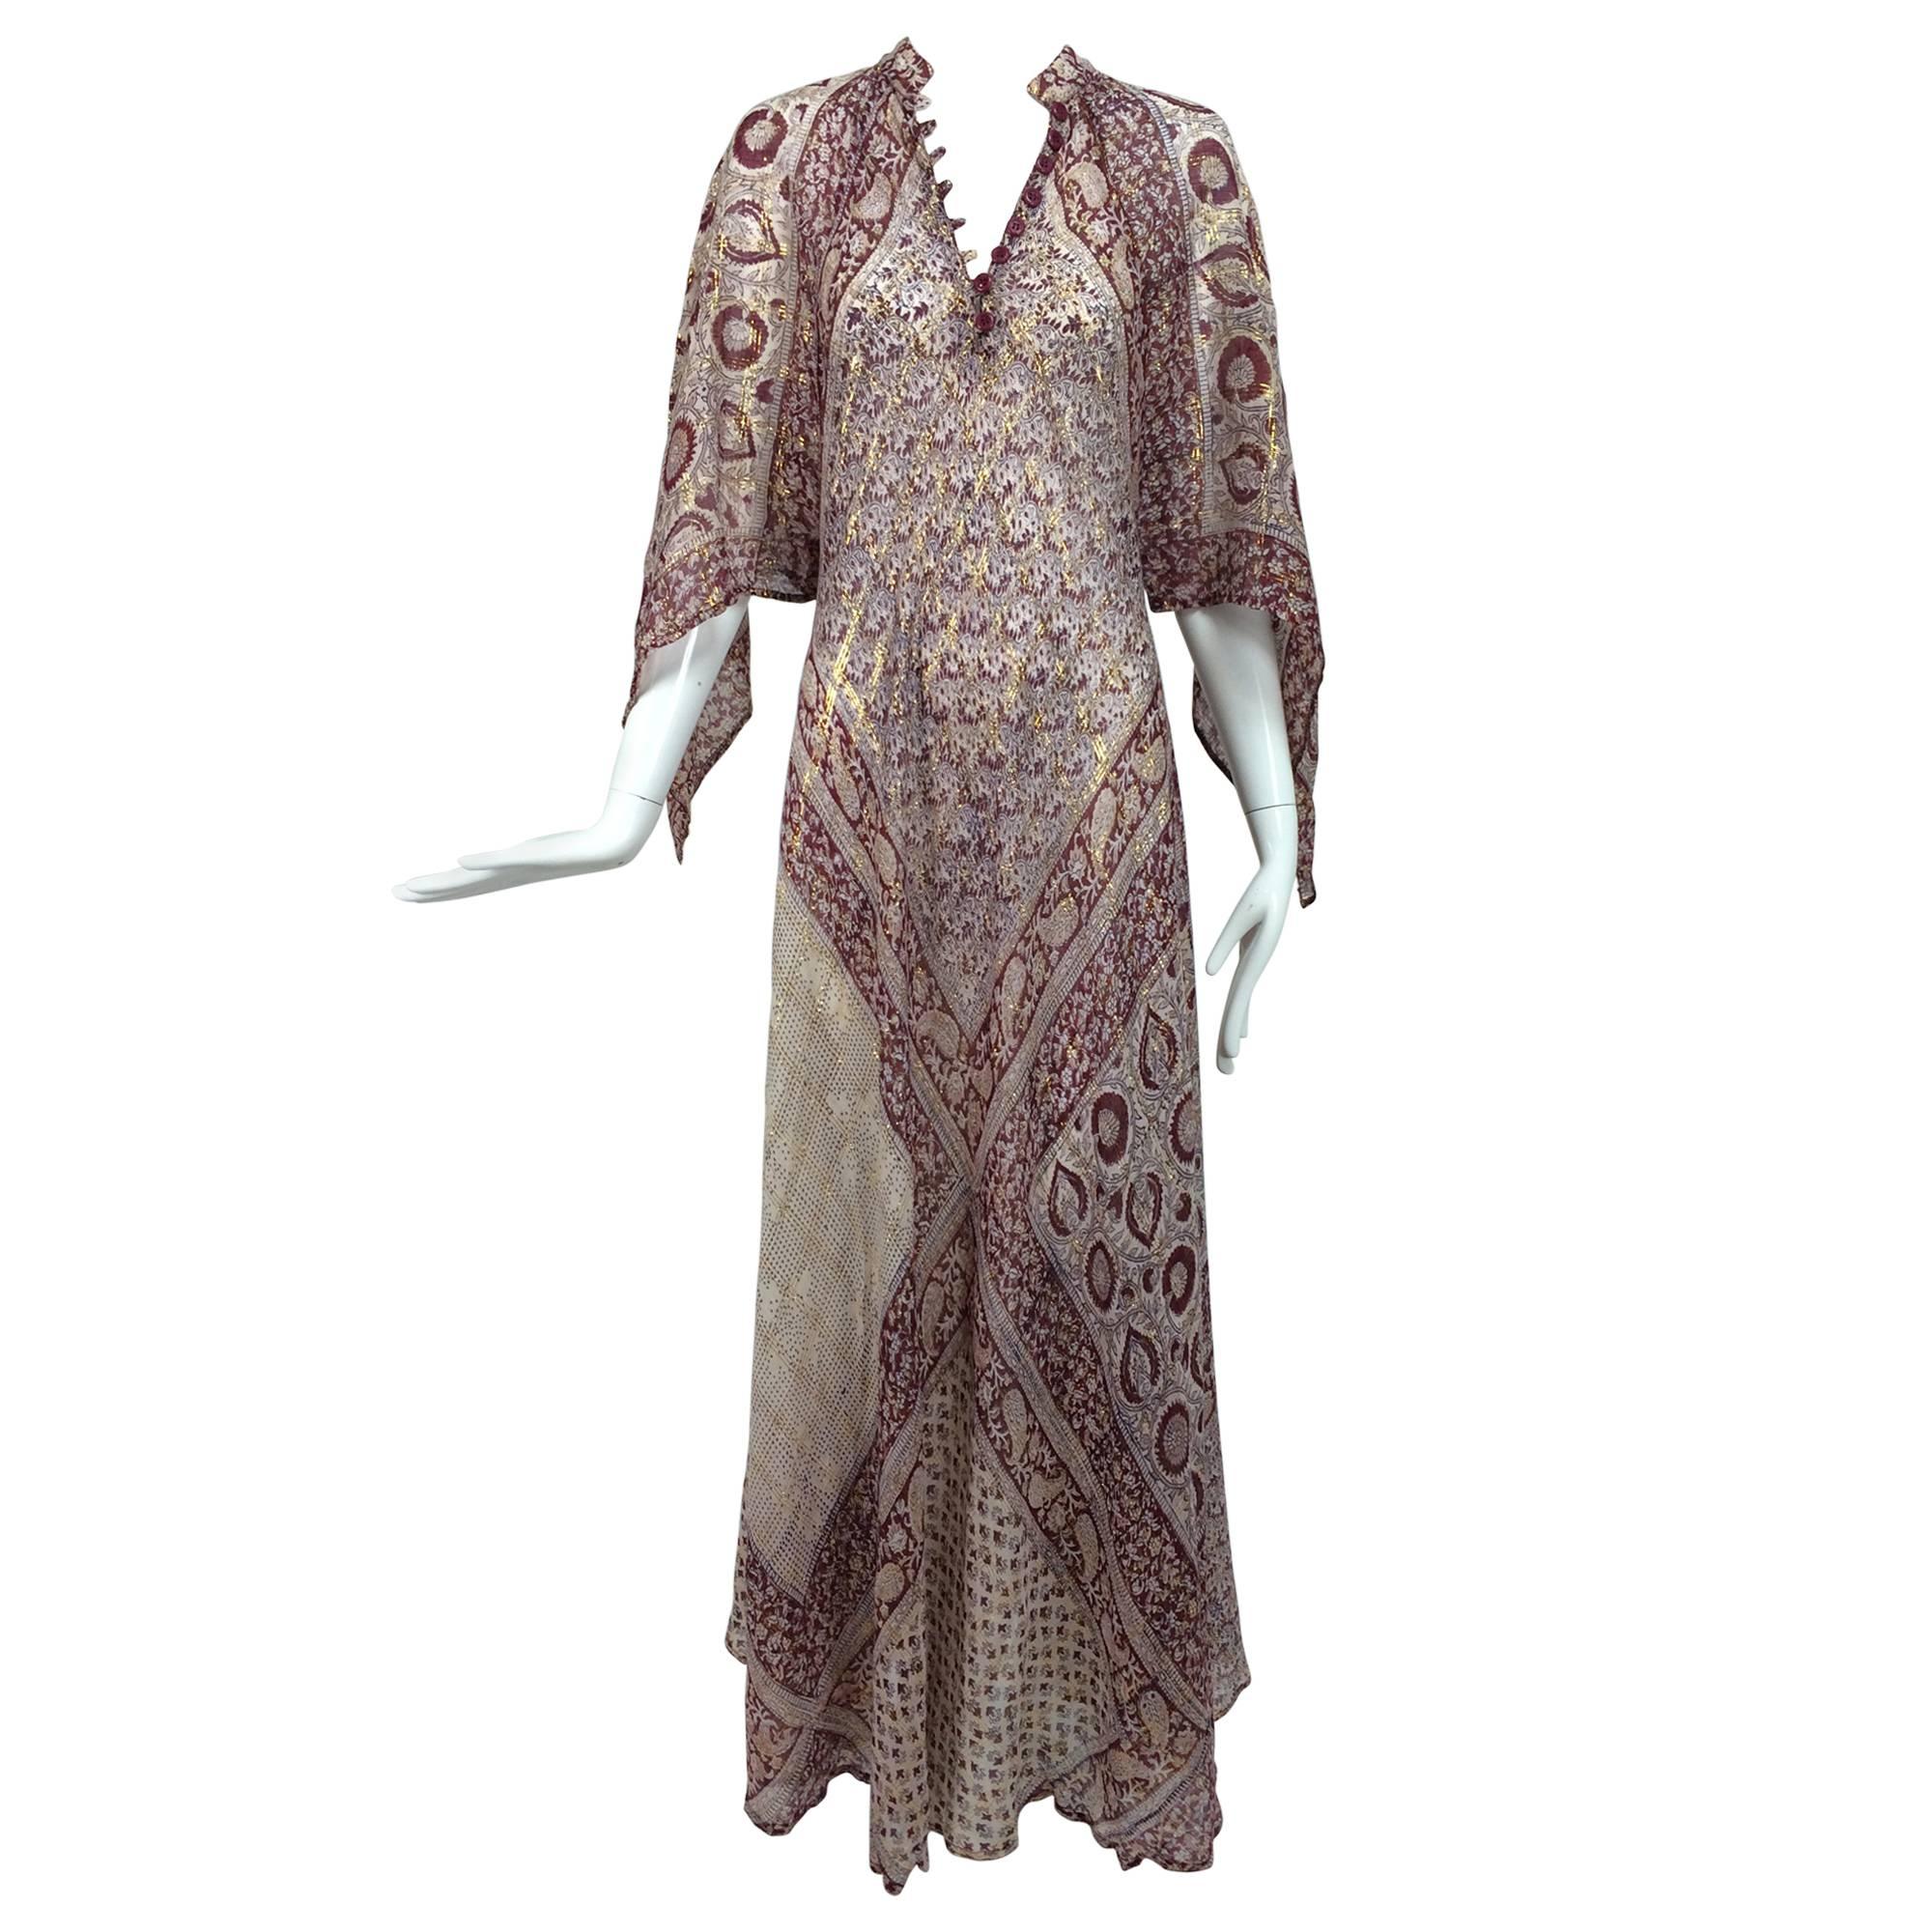 Sheer gauze block print with gold caftan from India 1960s Woodward & Lothrop